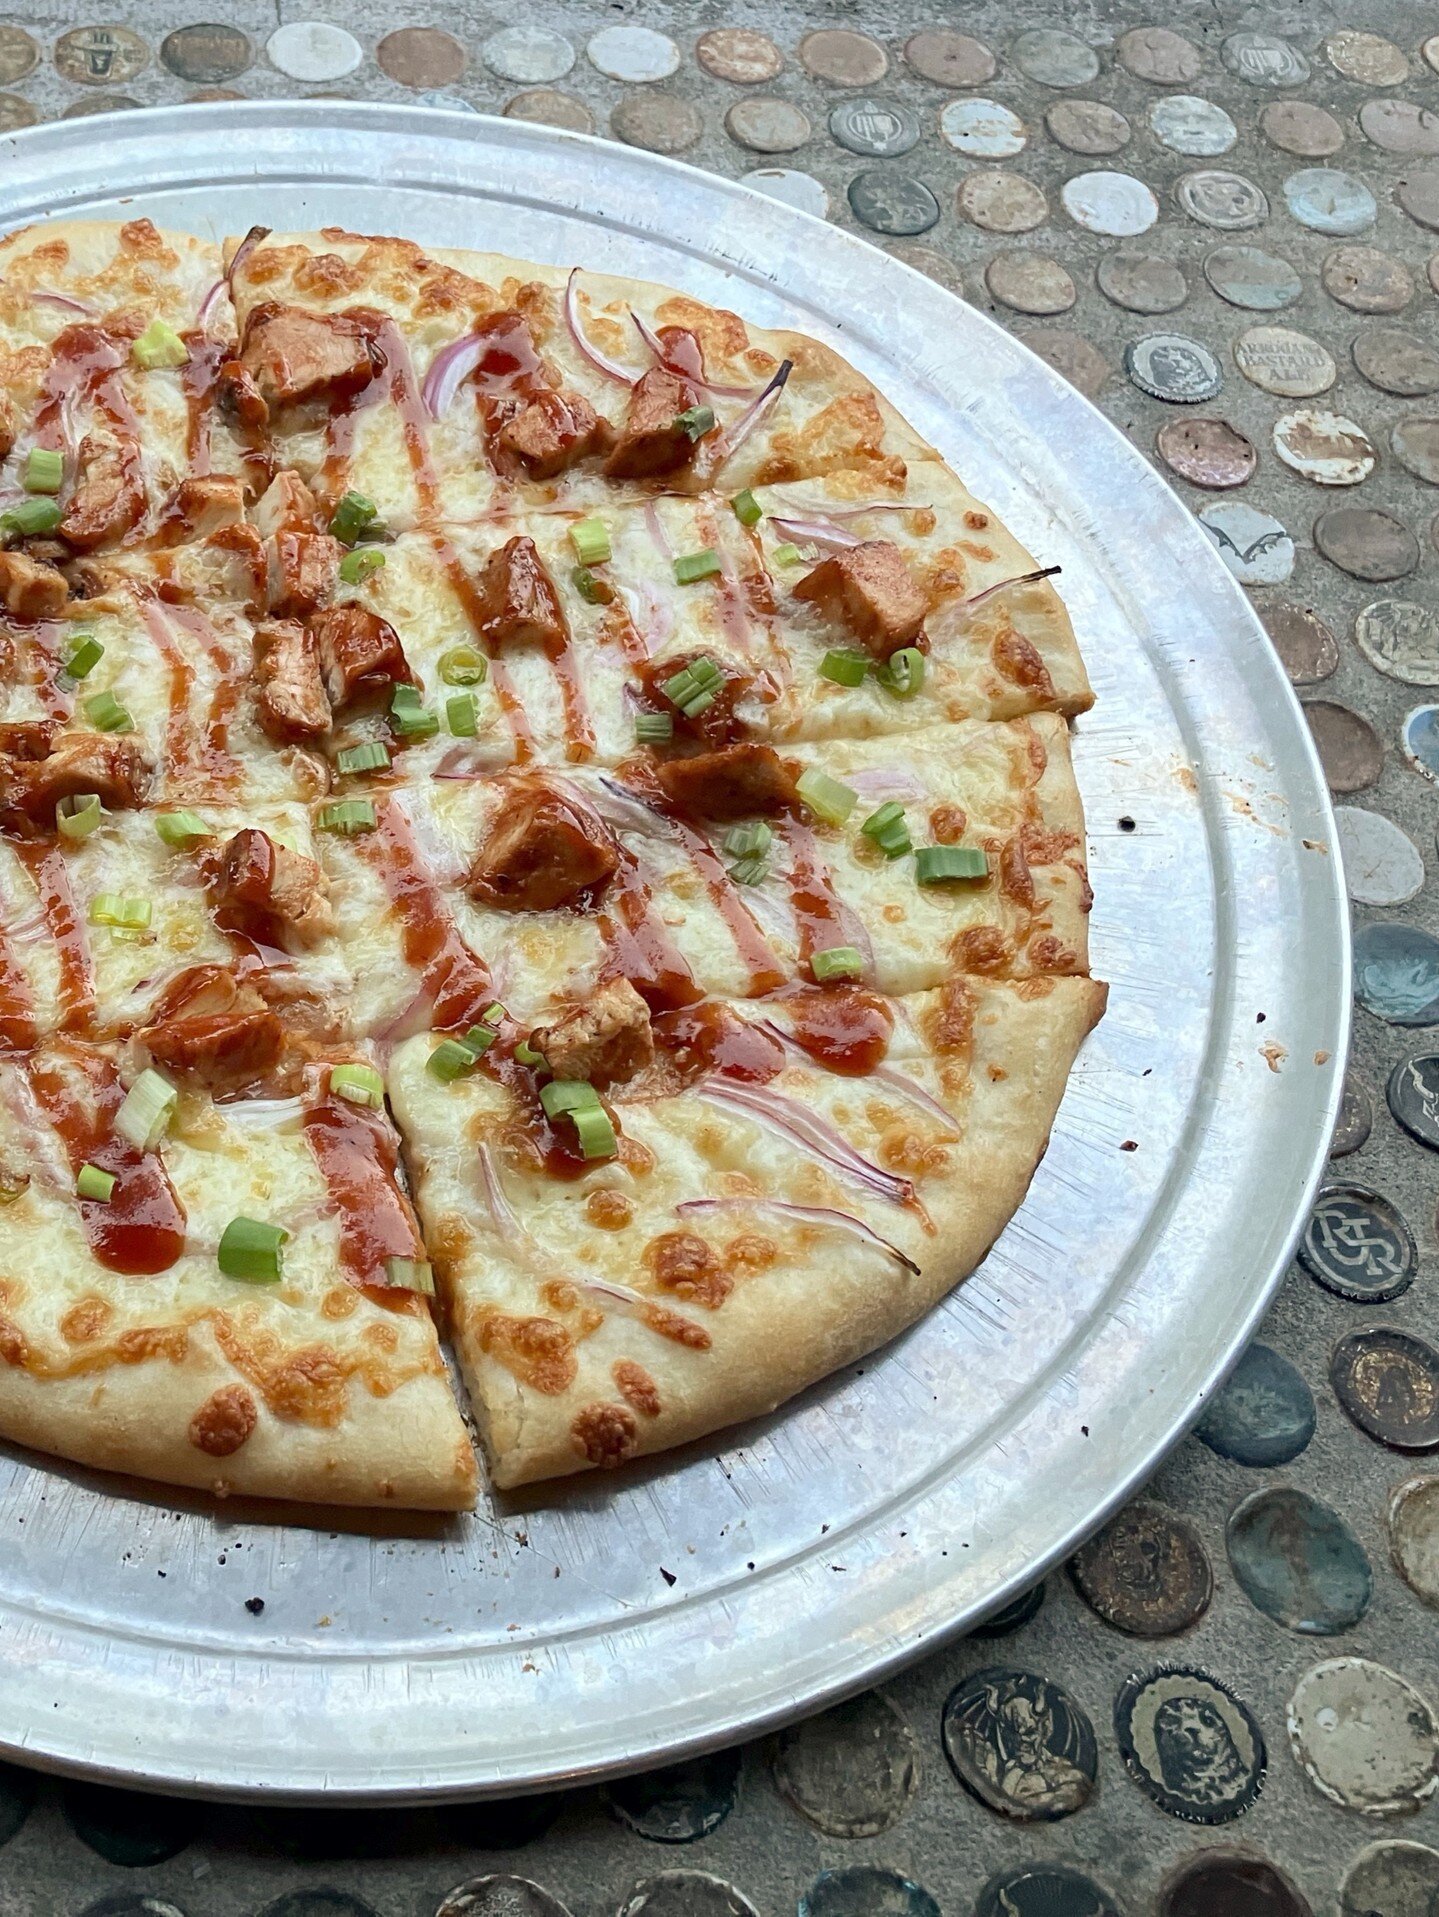 Don't miss our weekend special 🍕

BBQ Chicken Flatbread!! House-smoked chicken, olive oil, mozzarella, smoked provolone and thinly sliced red onions.